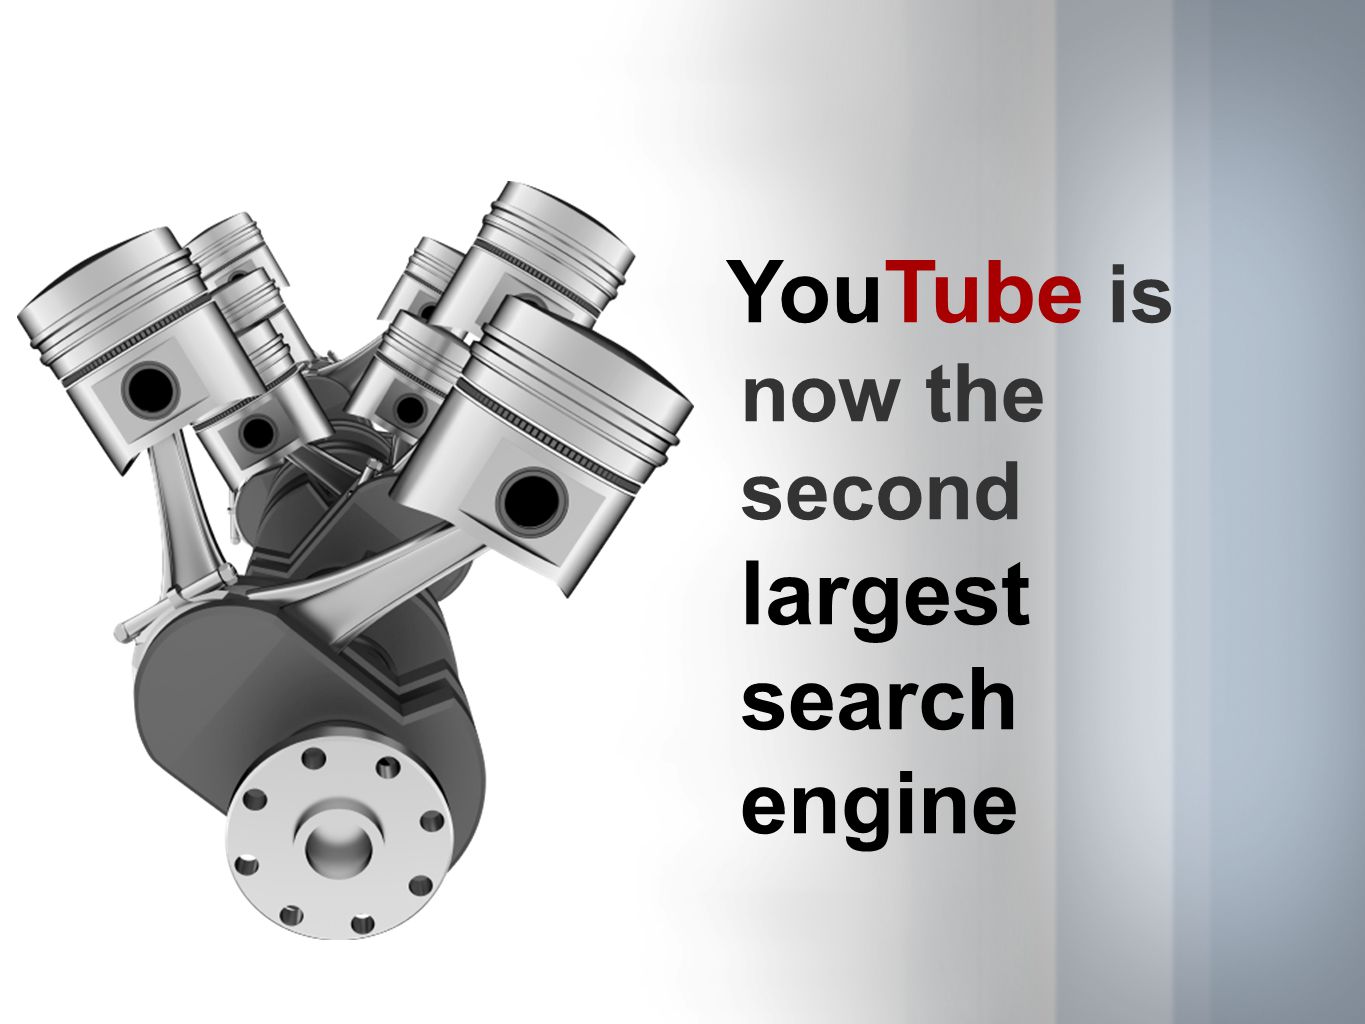 YouTube is now the second largest search engine